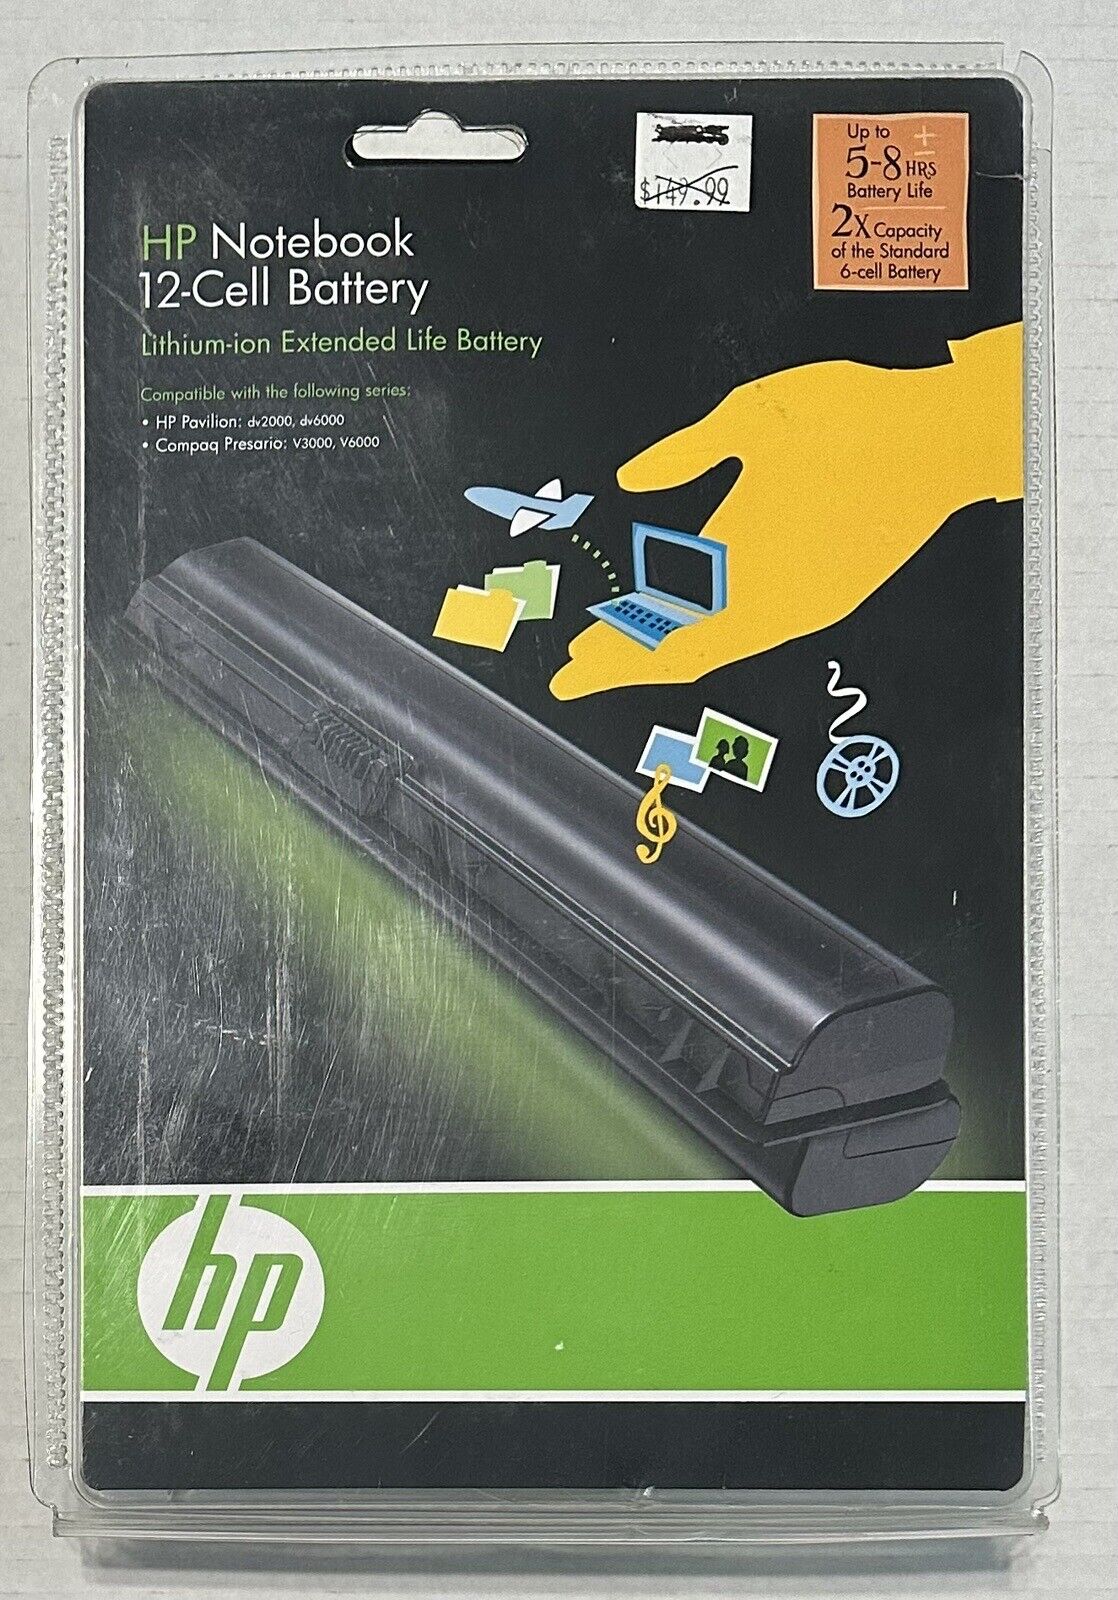 HP Notebook 12-Cell Battery Lithium-ion Extended Battery Life Factory Sealed